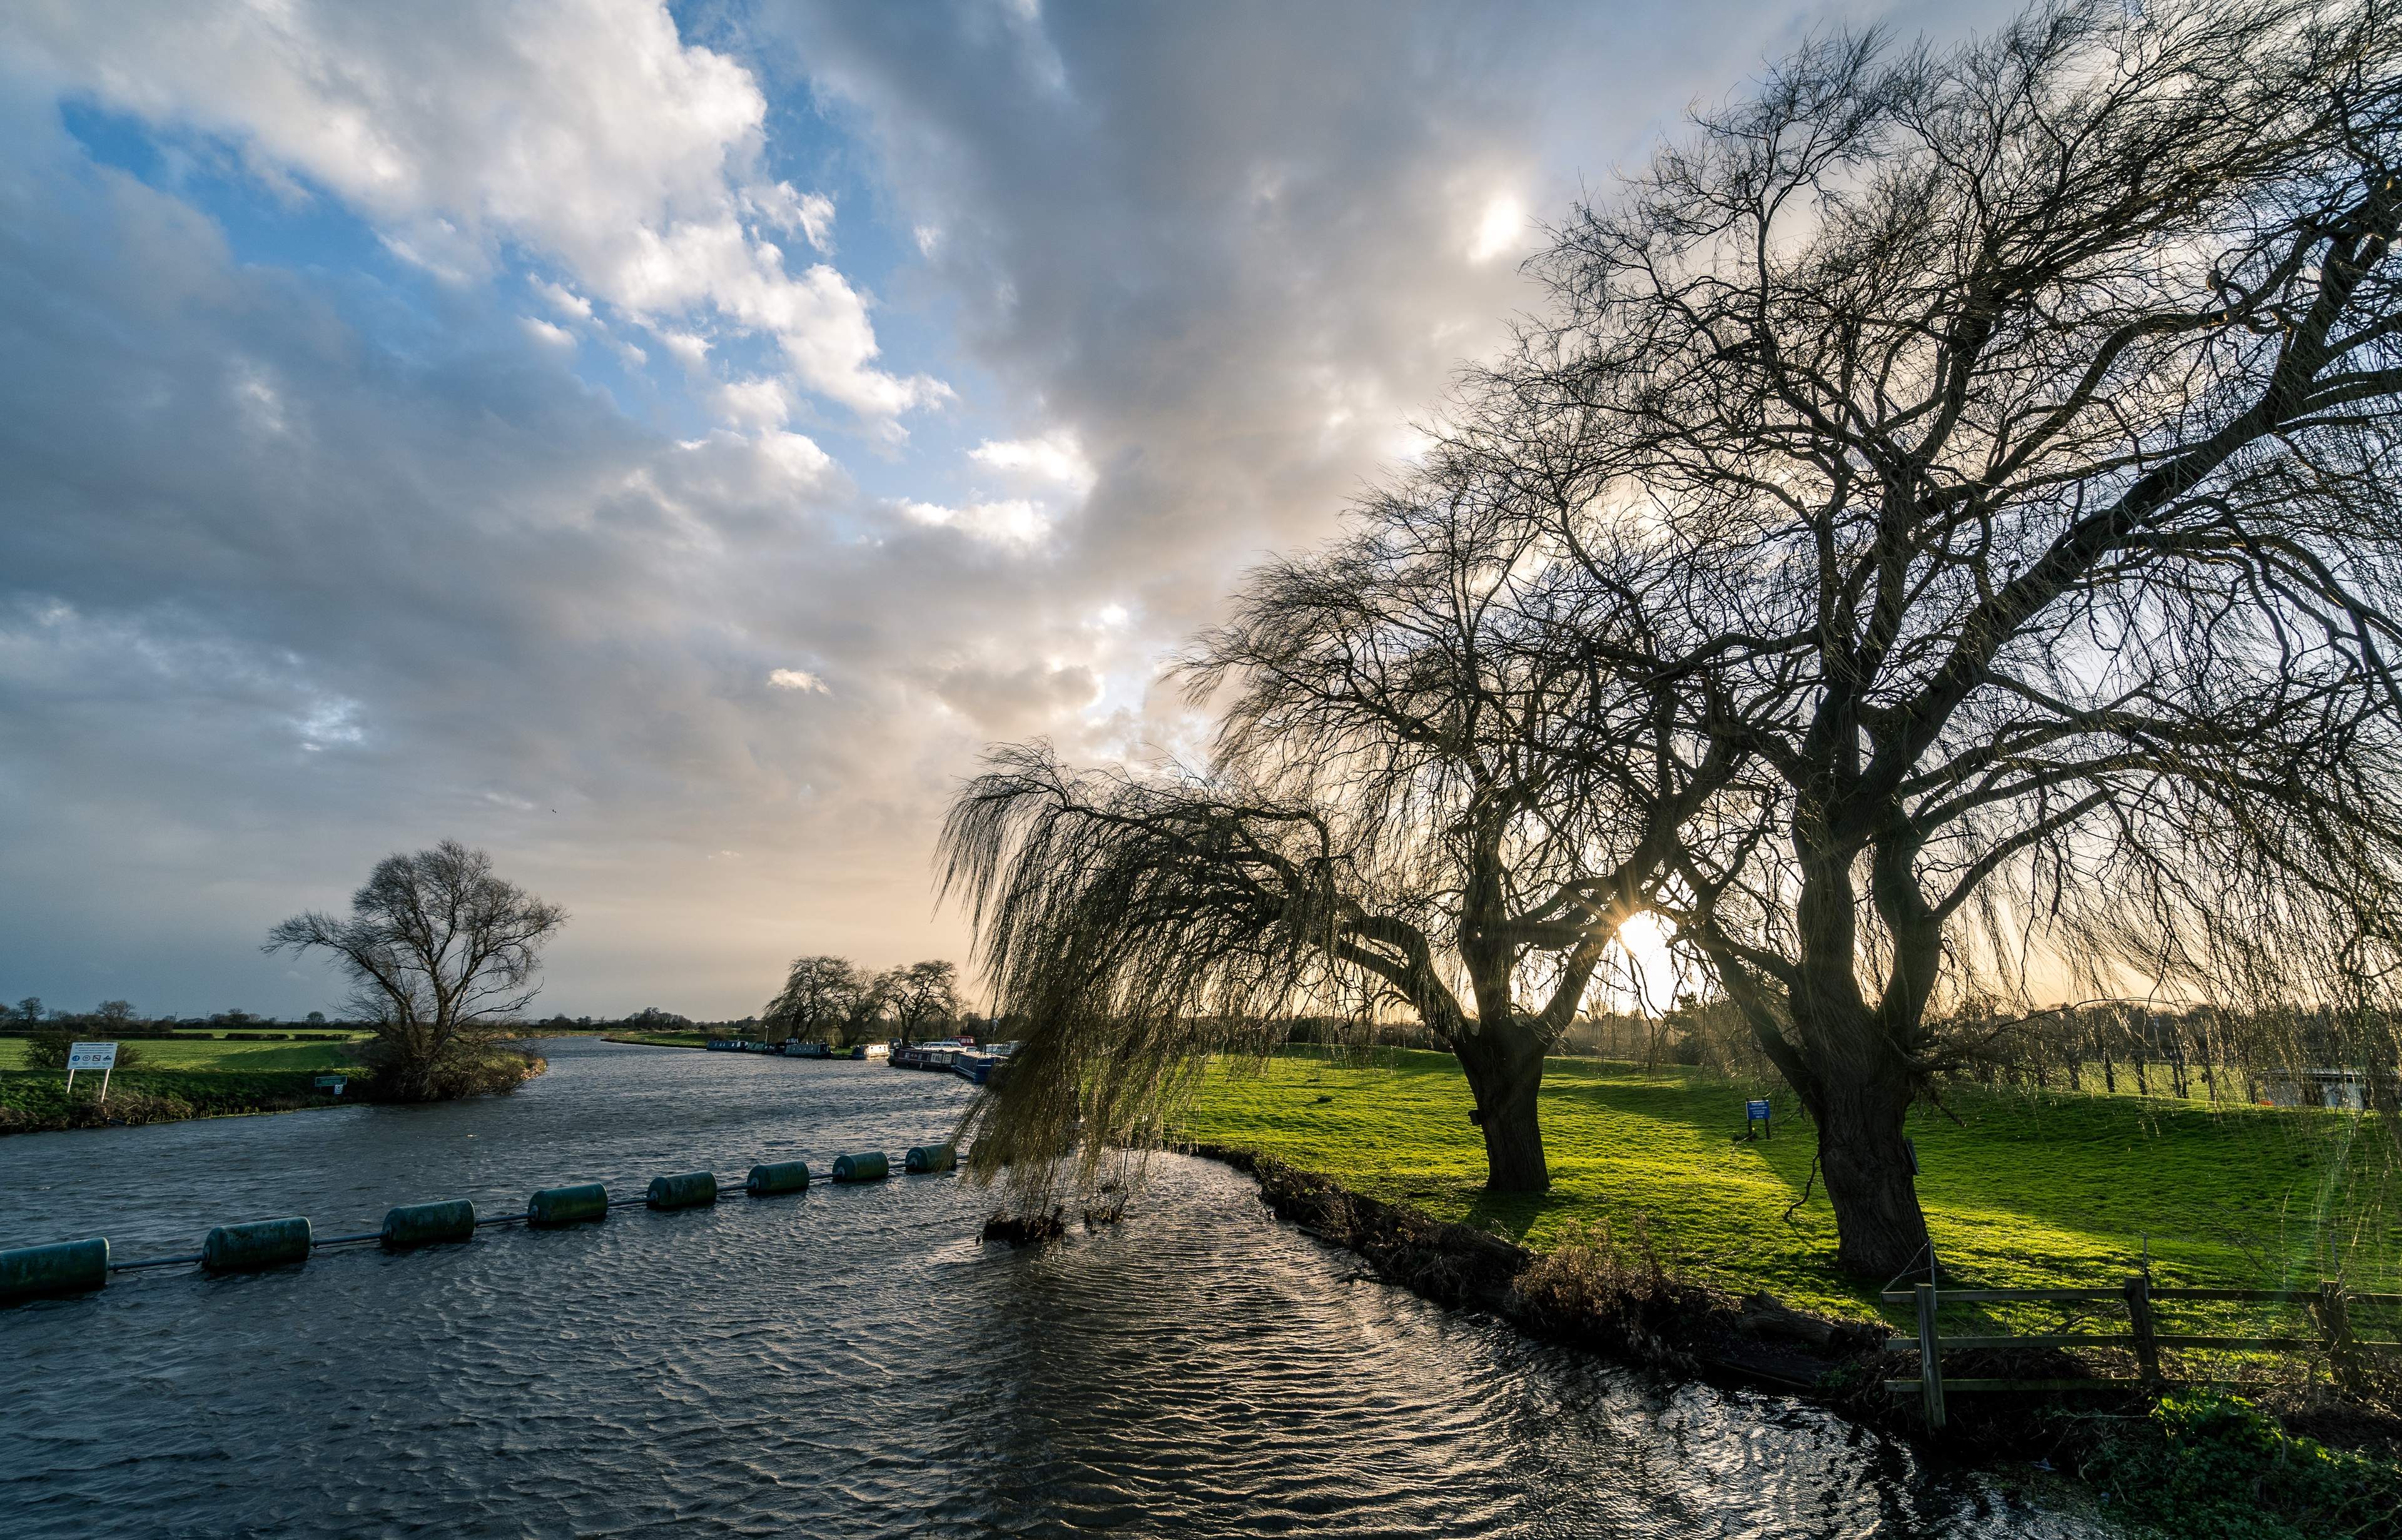 A sunset view over some canale in Waterbeach, Cambridgeshire, UK